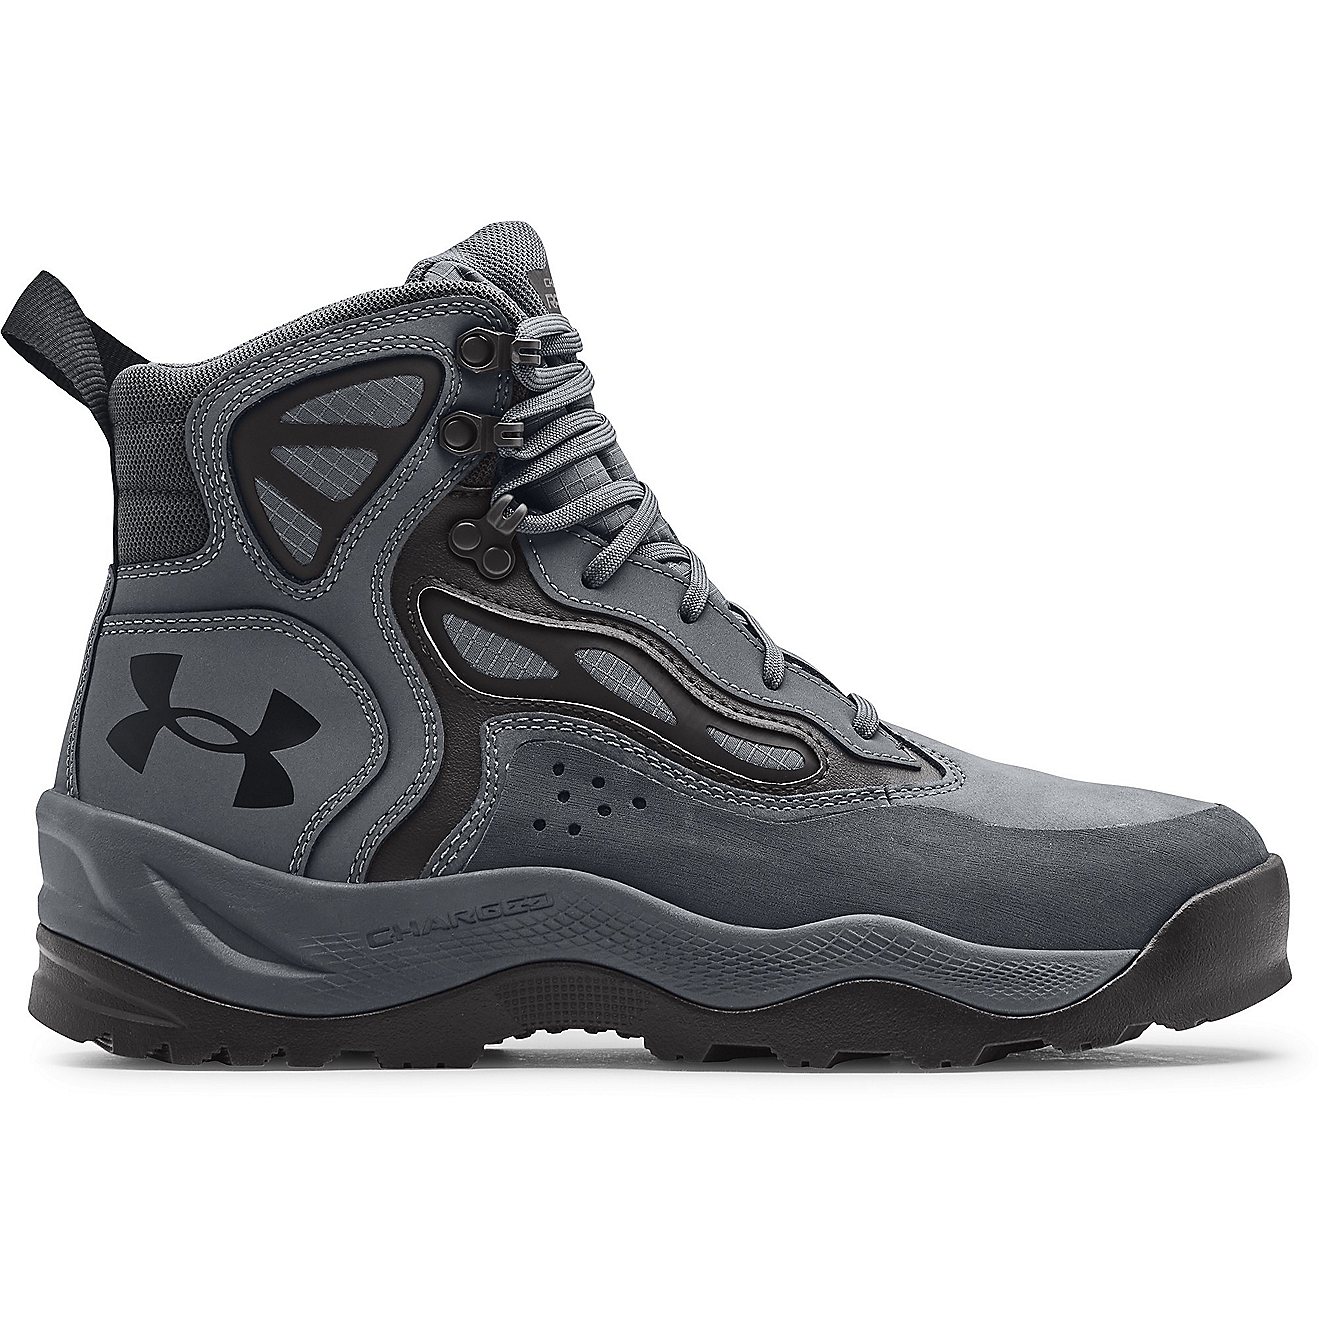 Under Armour Men's Charged Raider Mid Waterproof Hiking Boots                                                                    - view number 1